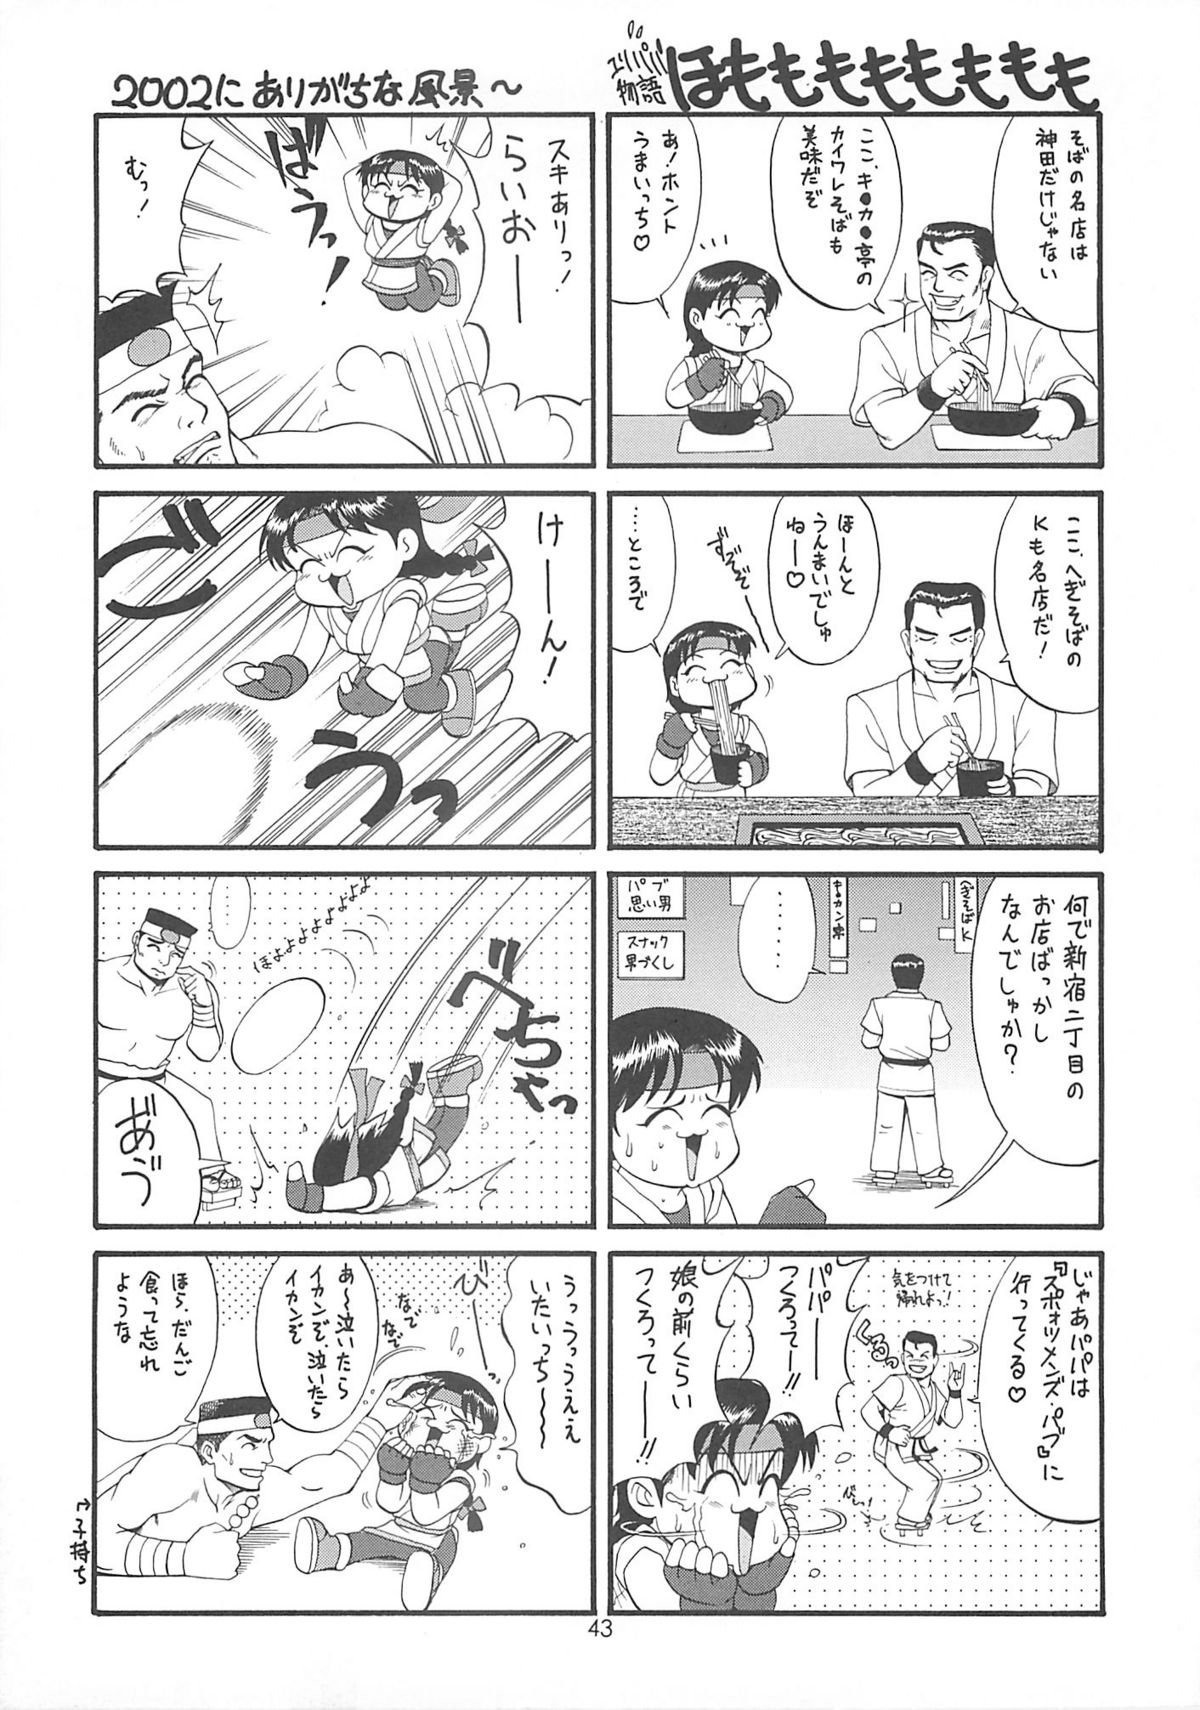 (C63) [Saigado] The Athena & Friends 2002 (King of Fighters) page 42 full